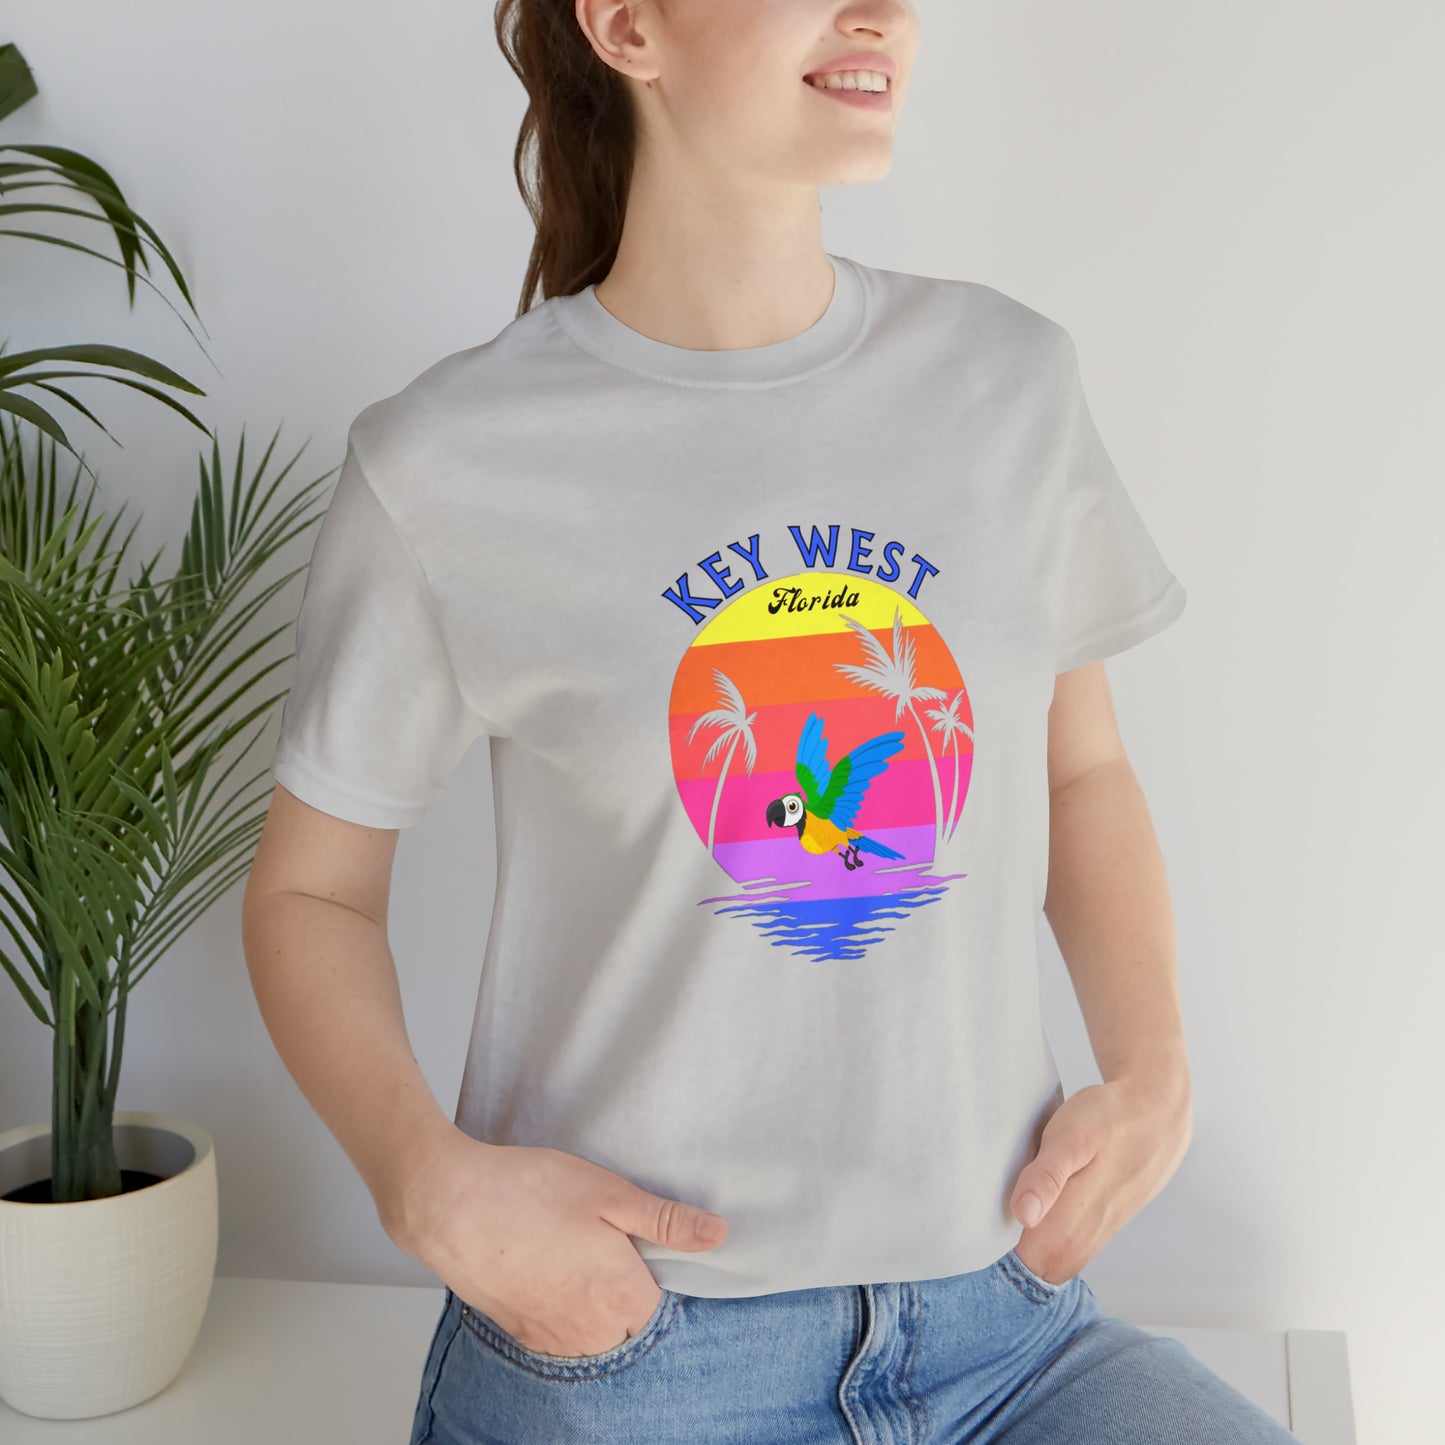 Places, States, Beach, Key West, Florida, United States of America, Animals, Birds- Adult, Regular Fit, Soft Cotton, T-shirt